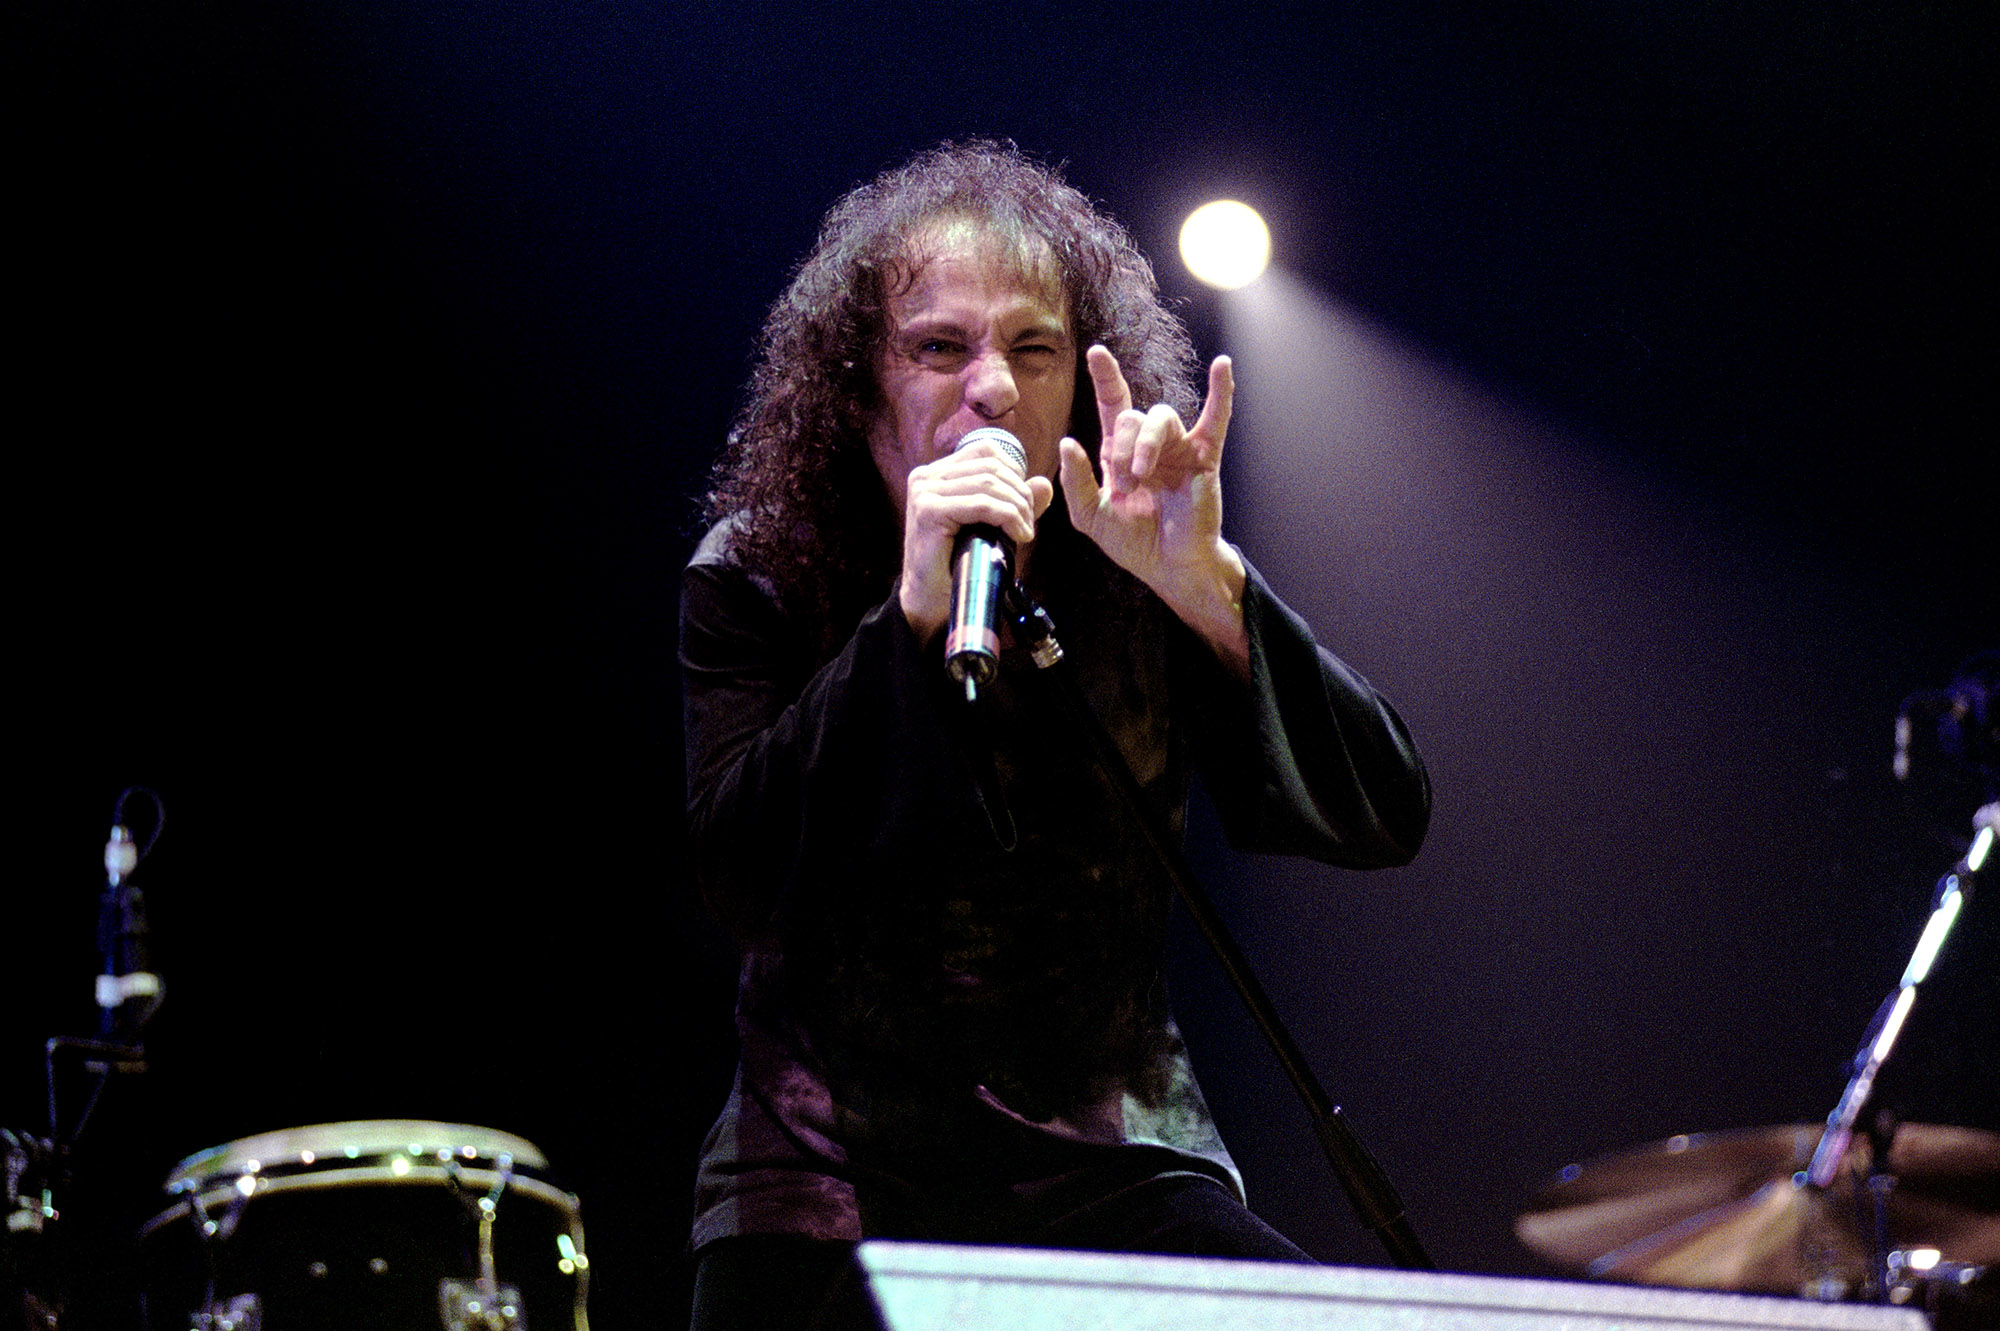 Milan Italy 23 October 2000 Live concert of Deep Purple & Romanian Philarmonic Orchestra + Ronnie James Dio at the Fila Forum Assago : Ronnie James Dio during the concert